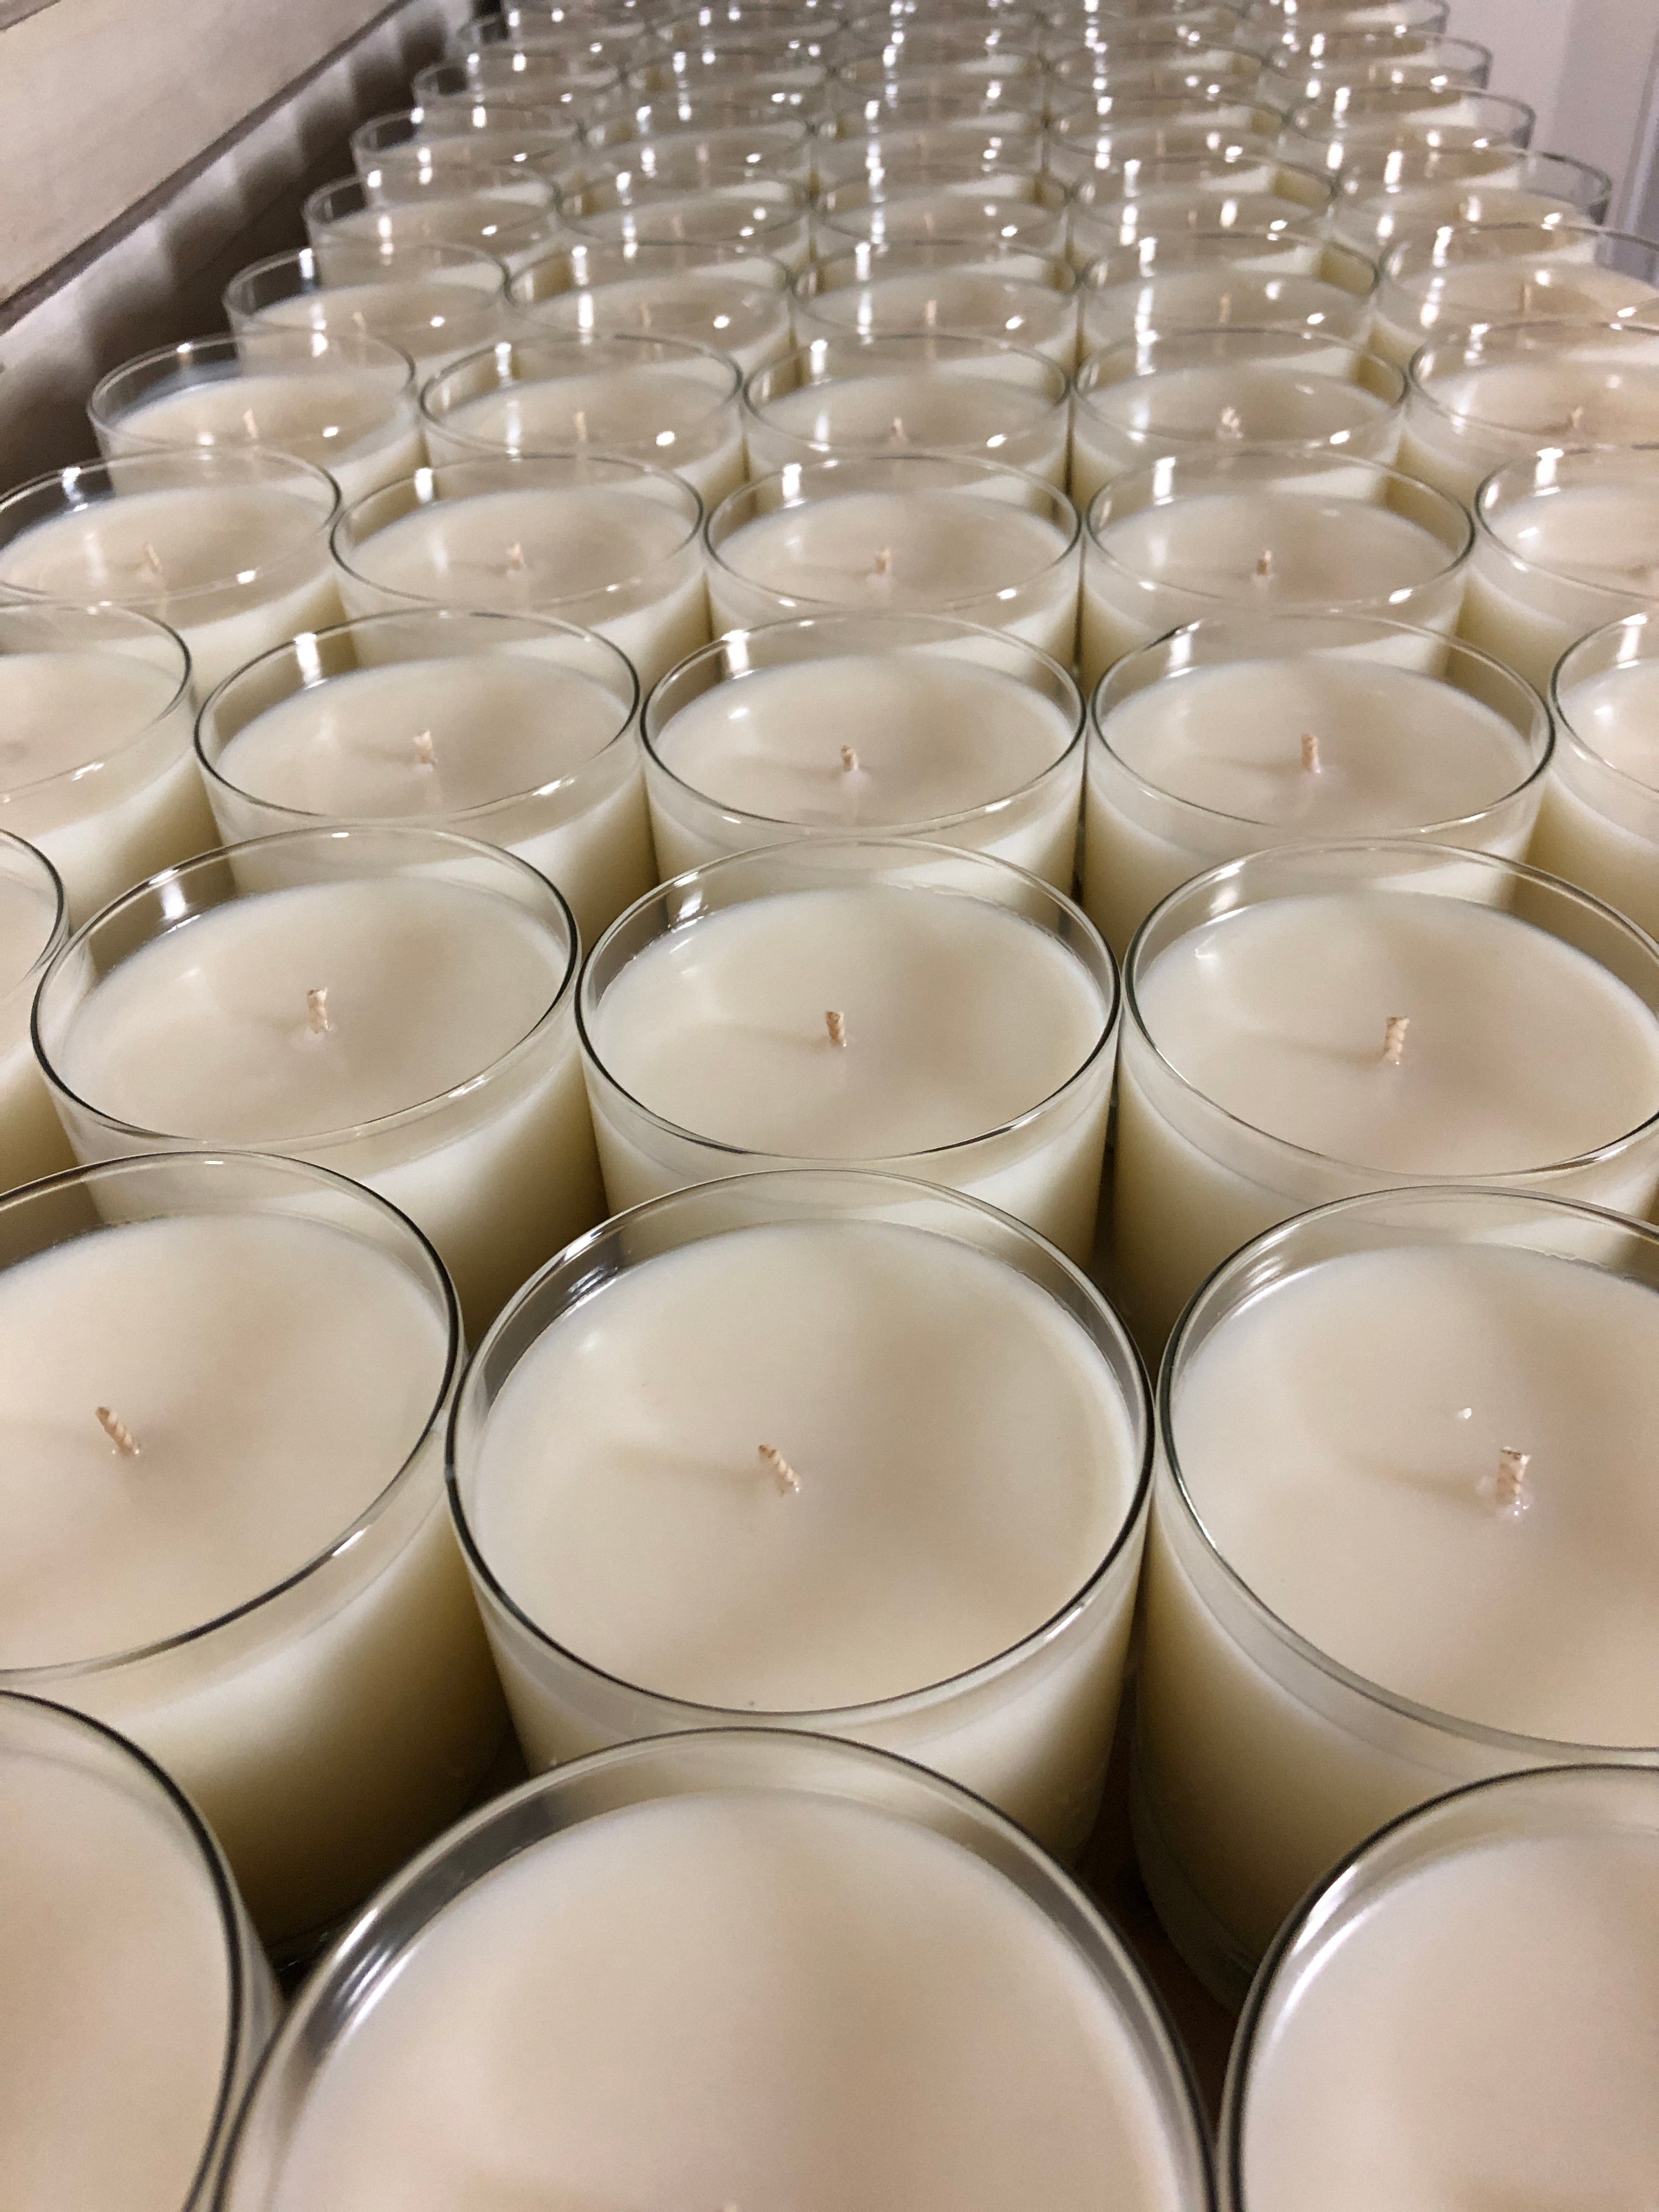 Table full of candles with trimmed cotton wicks